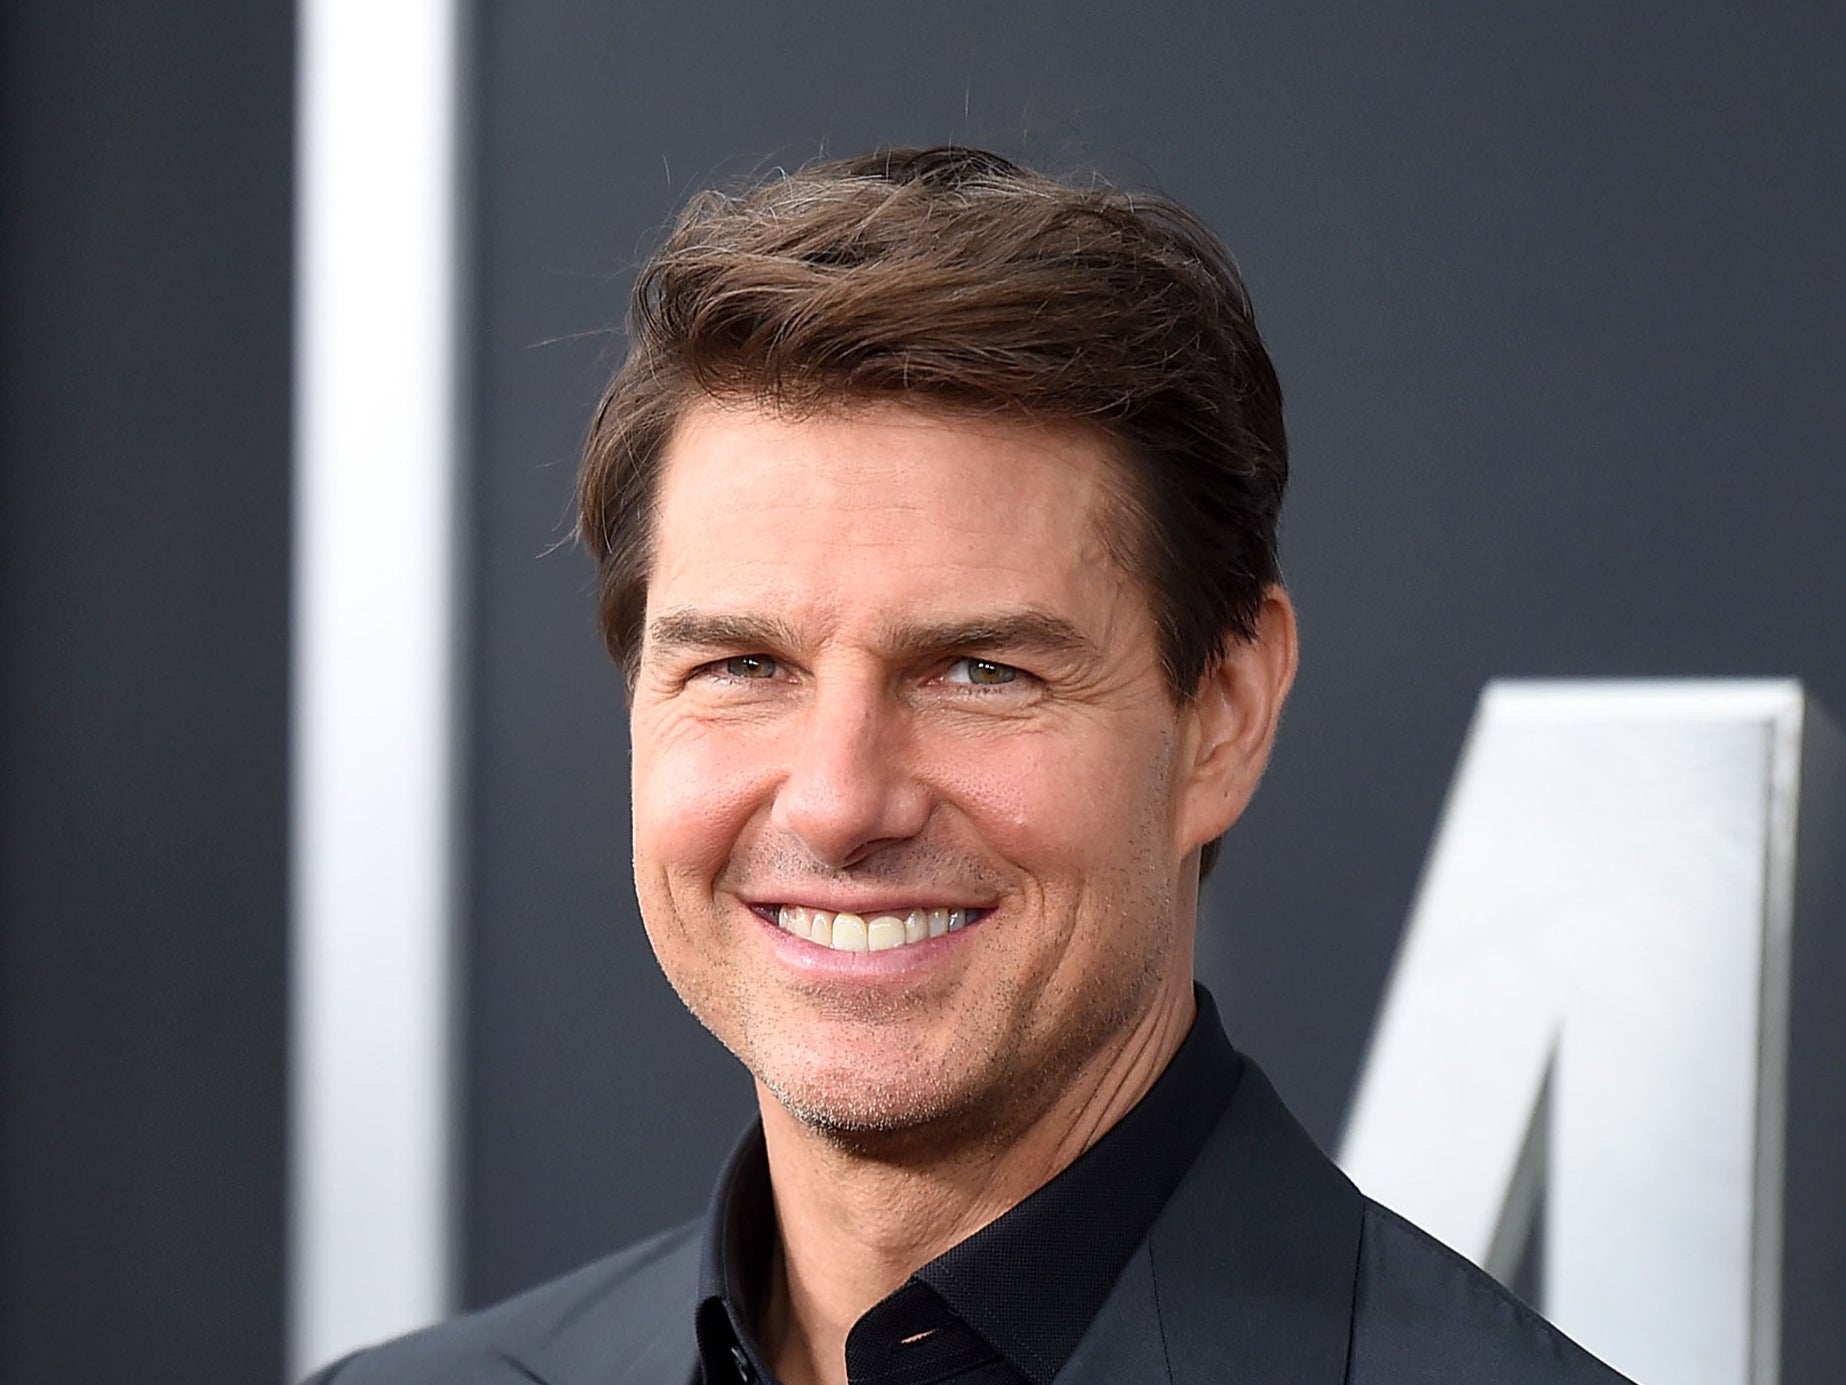 Tom Cruise was recorded shouting angrily at crew members on ‘Mission: Impossible 7’ set